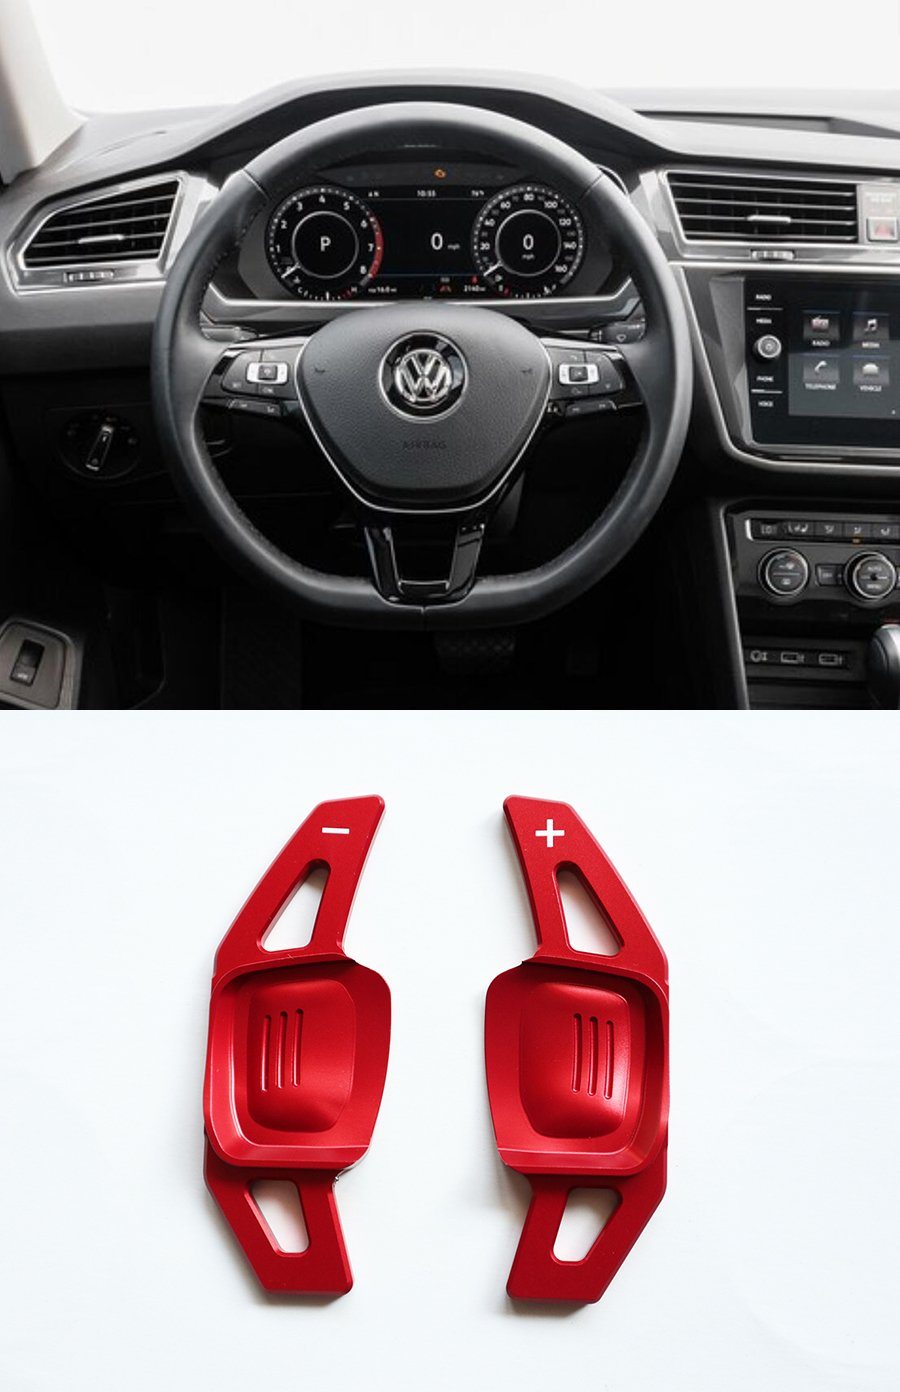 Pinalloy Red DSG Paddle Shifter Extension for Volkswagen VW Tiguan L Teramont PHIDEON C-TREK - Pinalloy Online Auto Accessories Lightweight Car Kit 